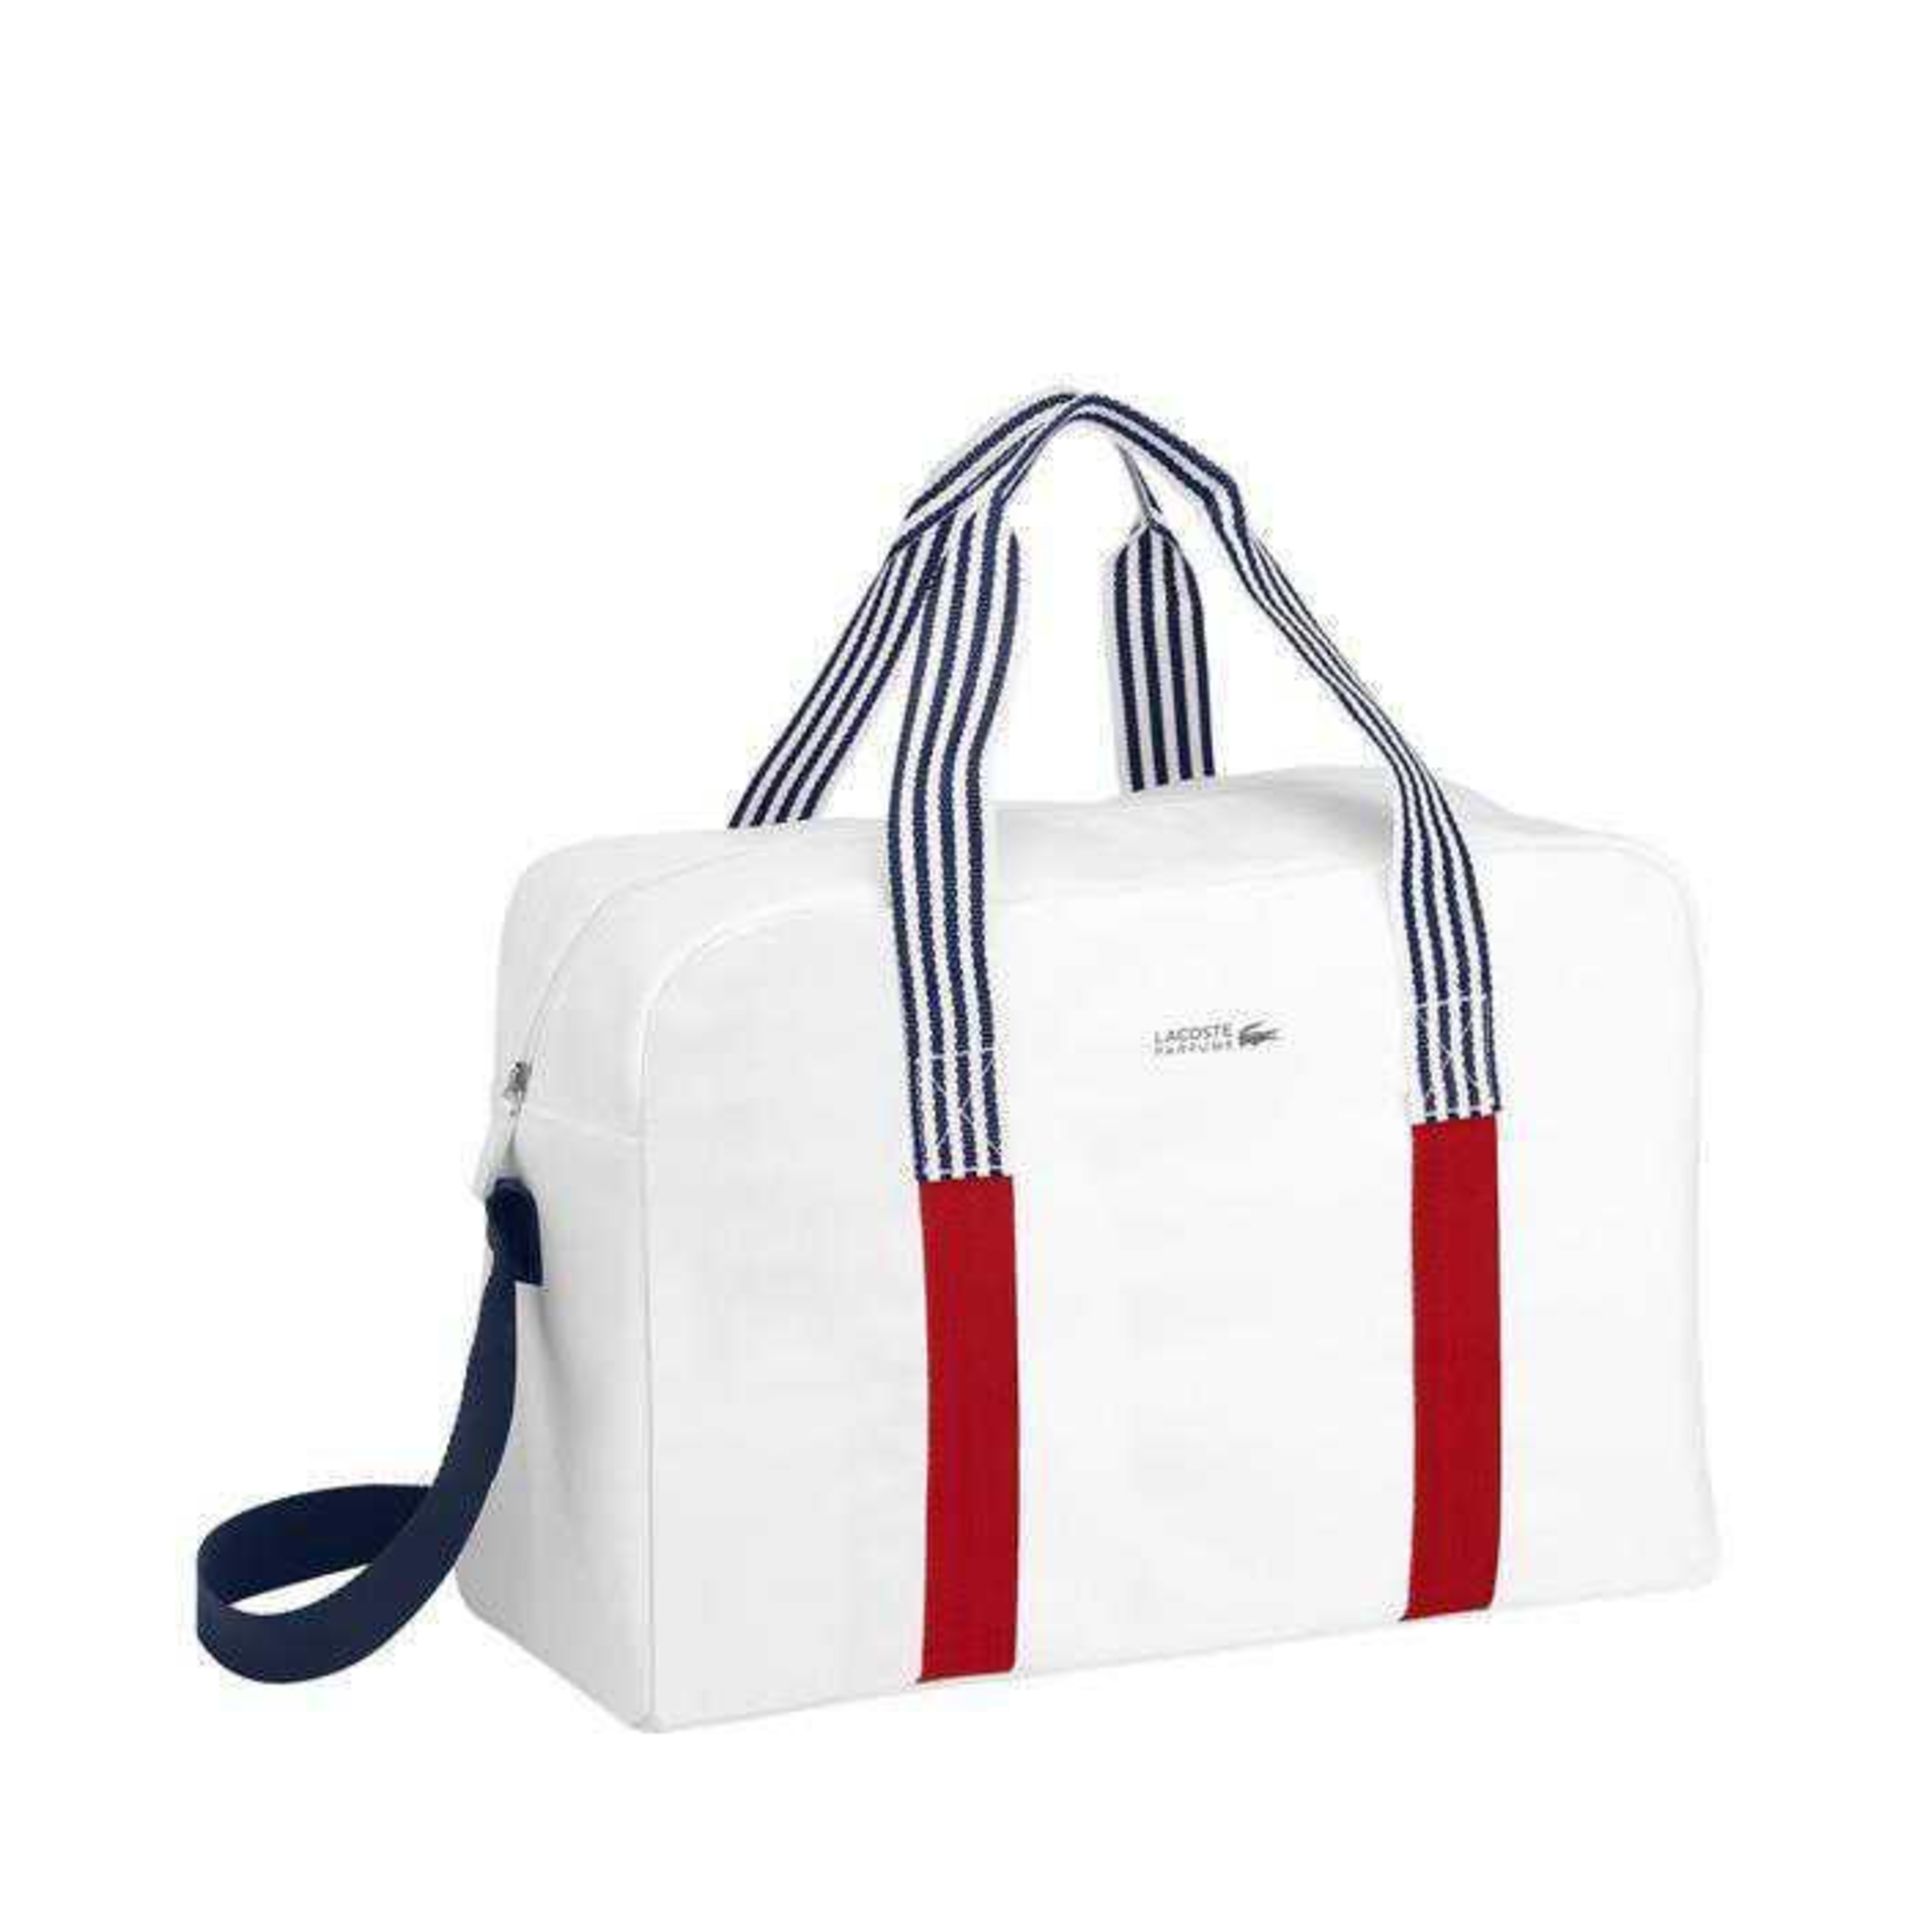 Rrp £70 Lacoste Unisex Gym Holdall Bag